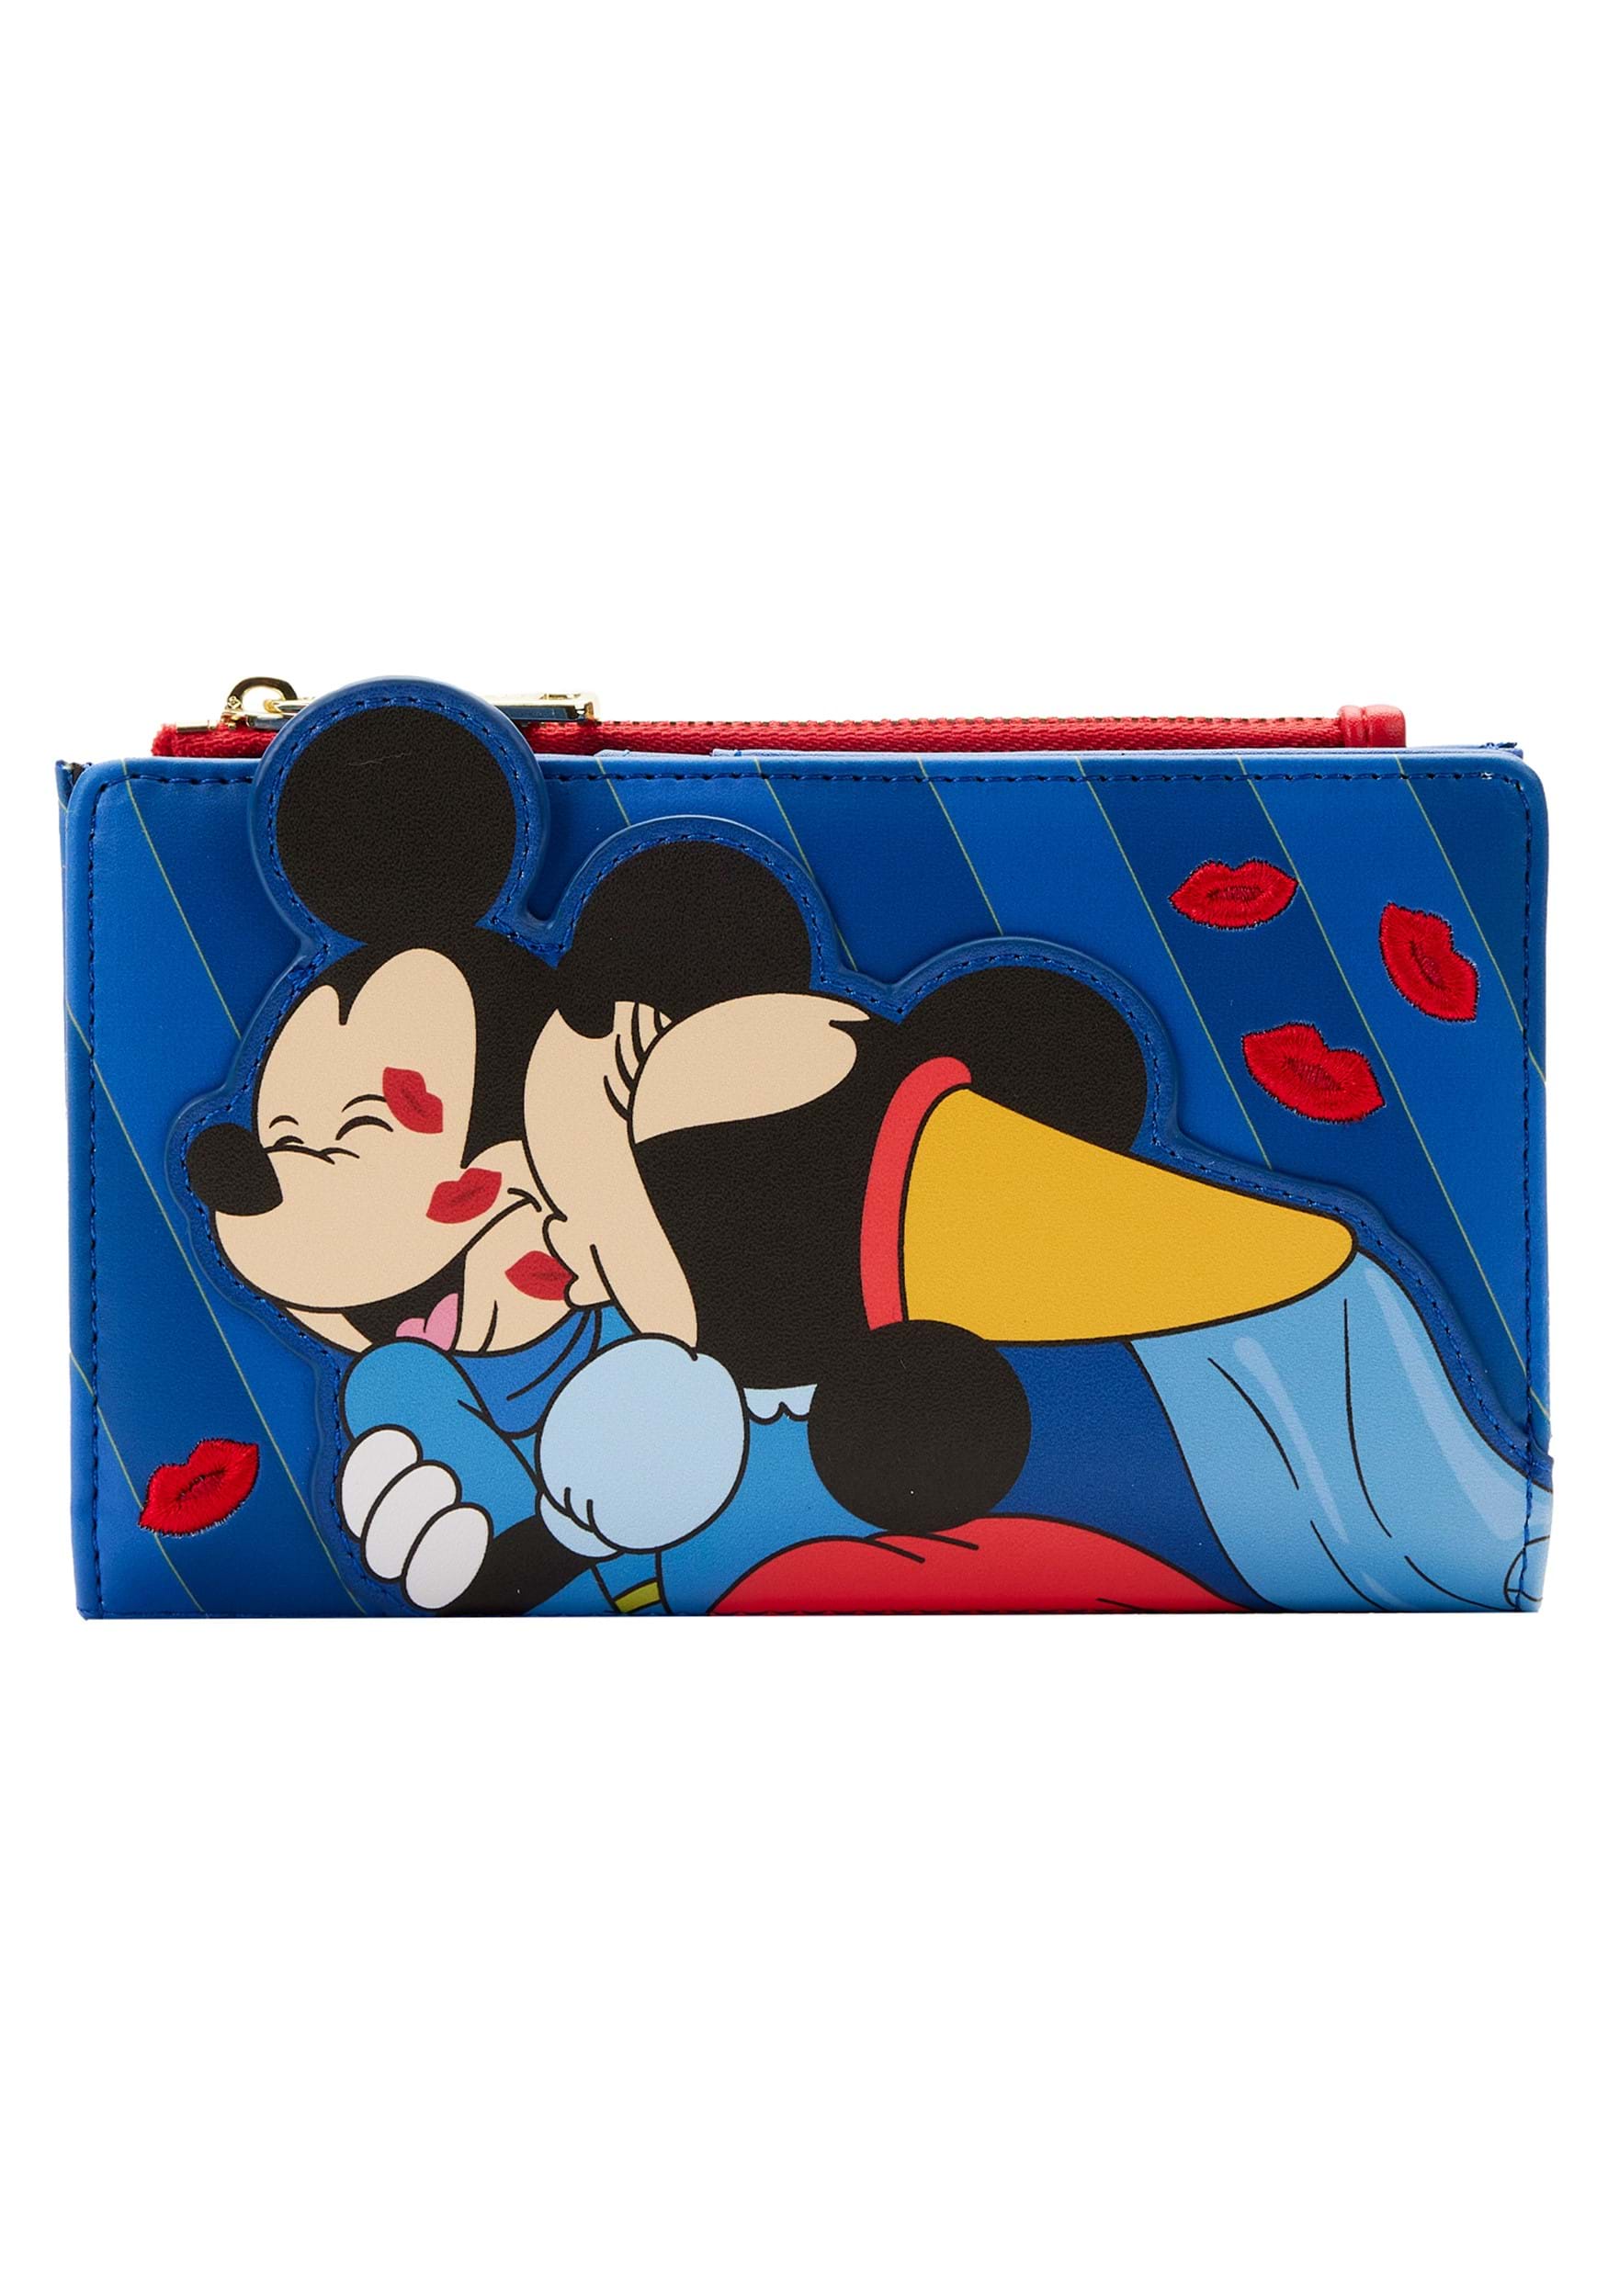 Mickey Minnie Mouse - Kiss - Valentine's Day - Embroidered Iron On